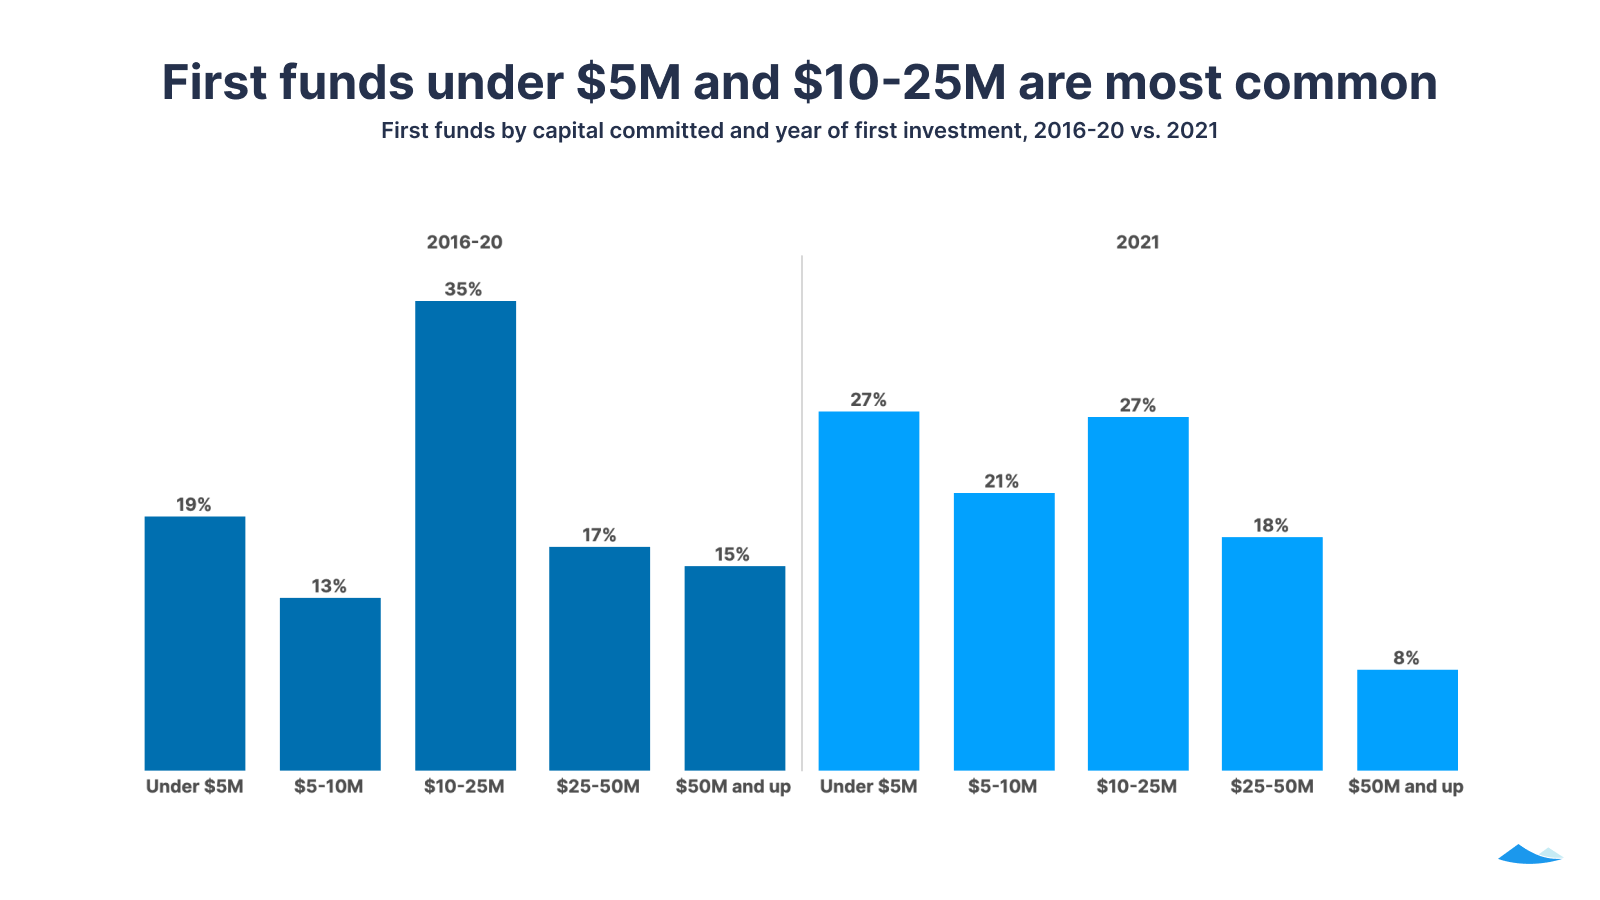 First funds under $5M and $10-25M are most common: First funds by capital committed and year of first investment, 2016-20 vs. 2021